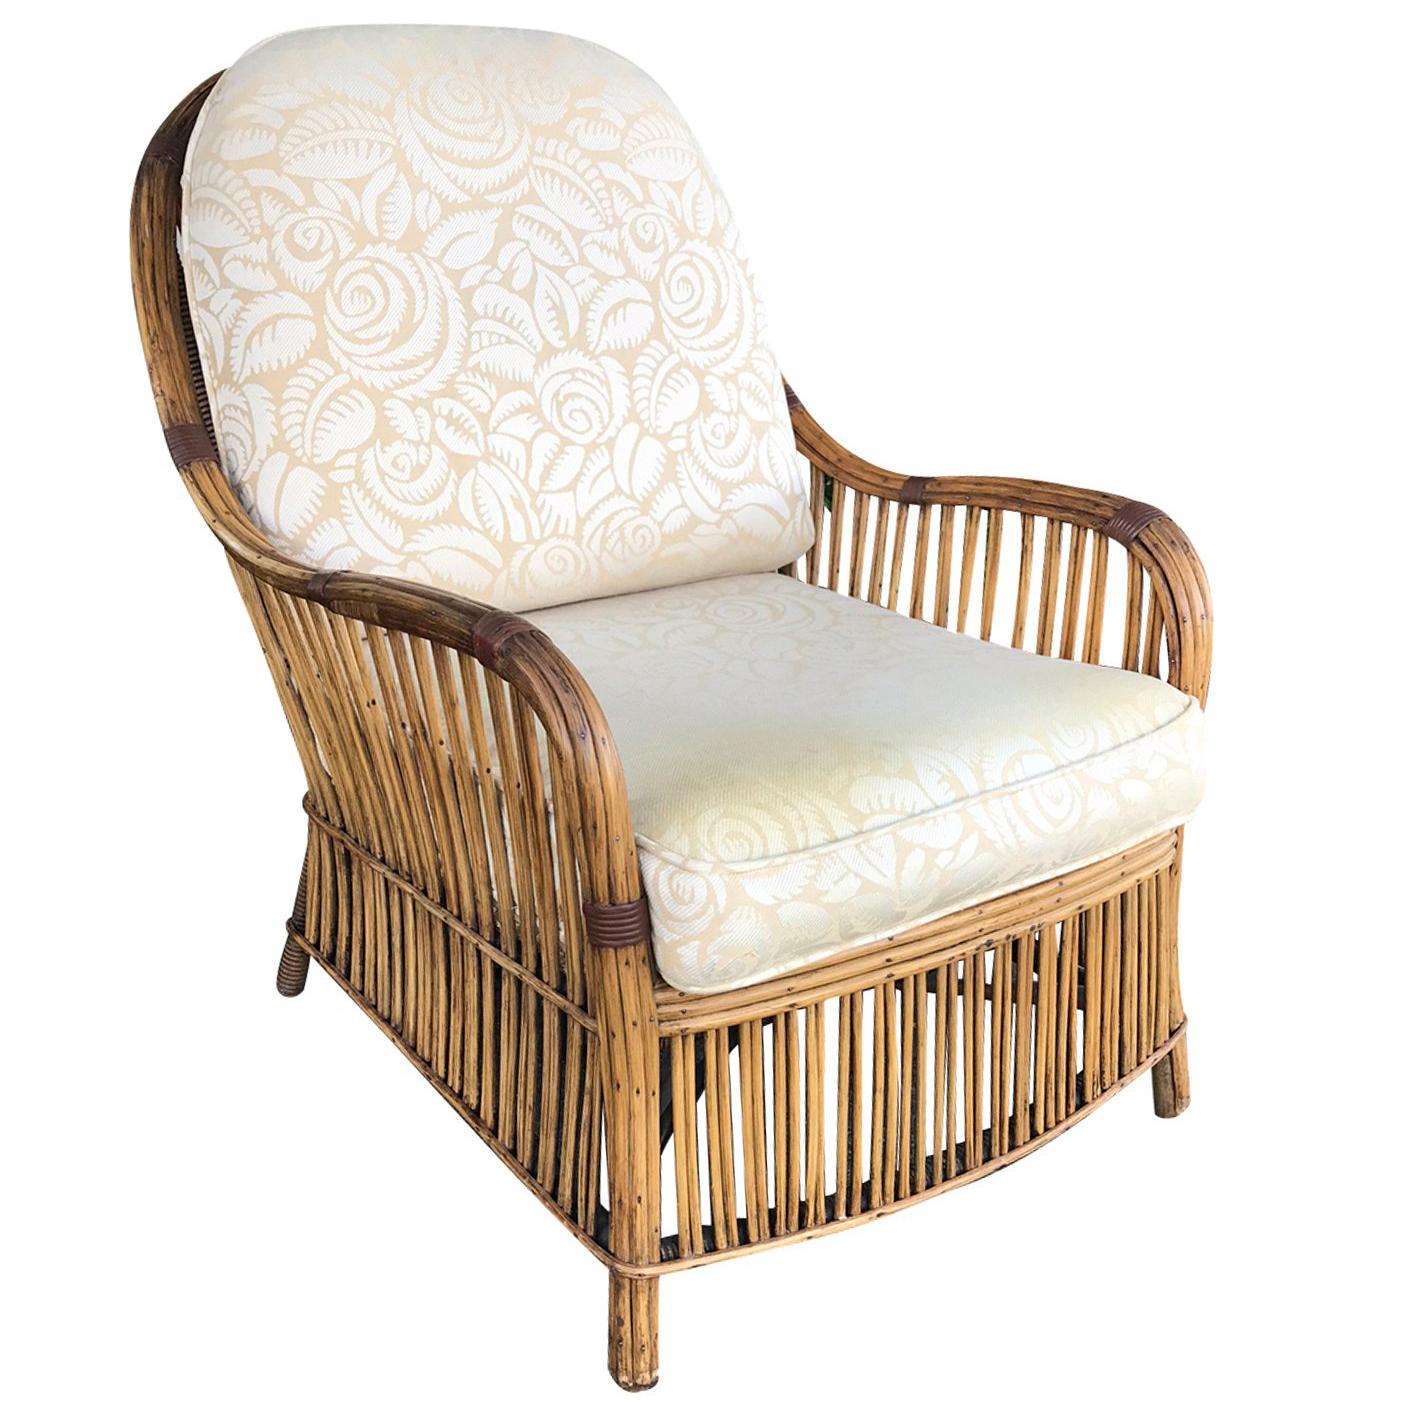 Early 20th Century Reed Armchair with Upholstered Seat and Back